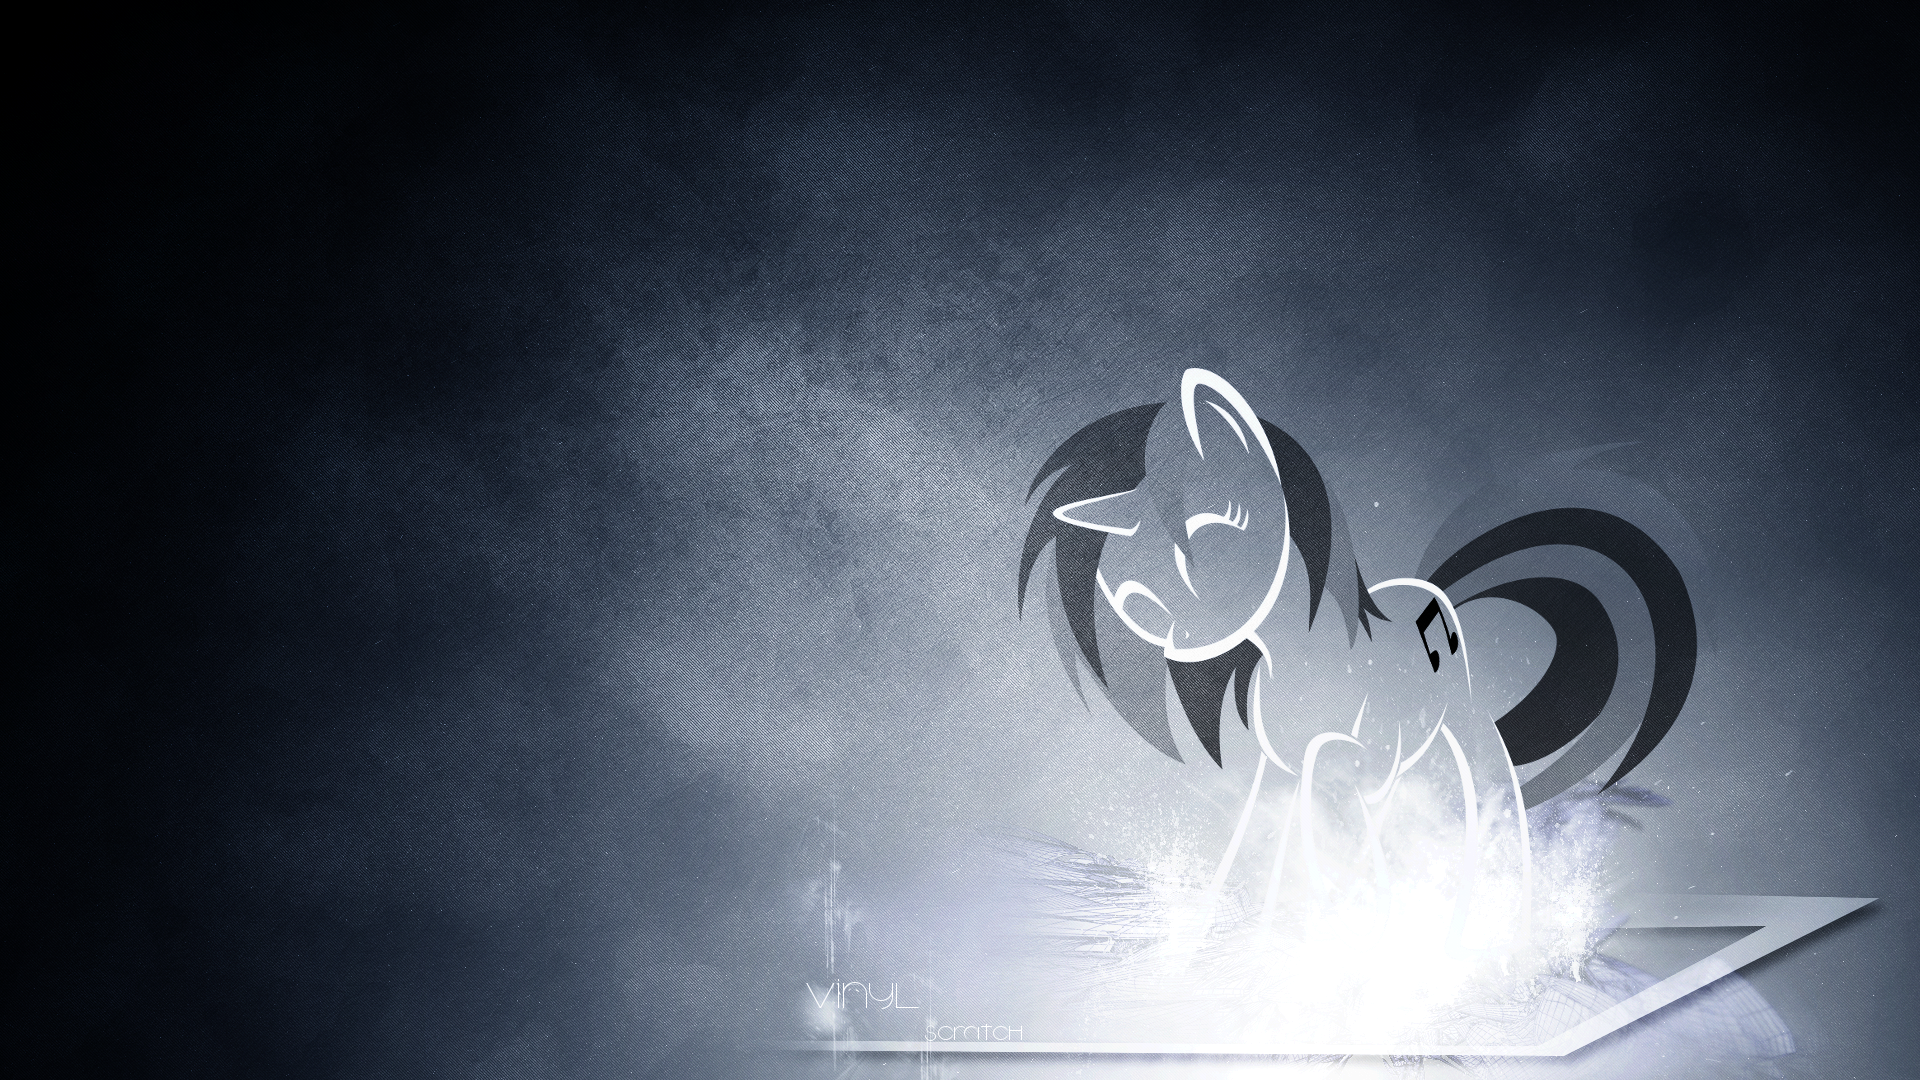 Vinyl Scratch Wallpaper #3 by DasinBoot and UP1TER